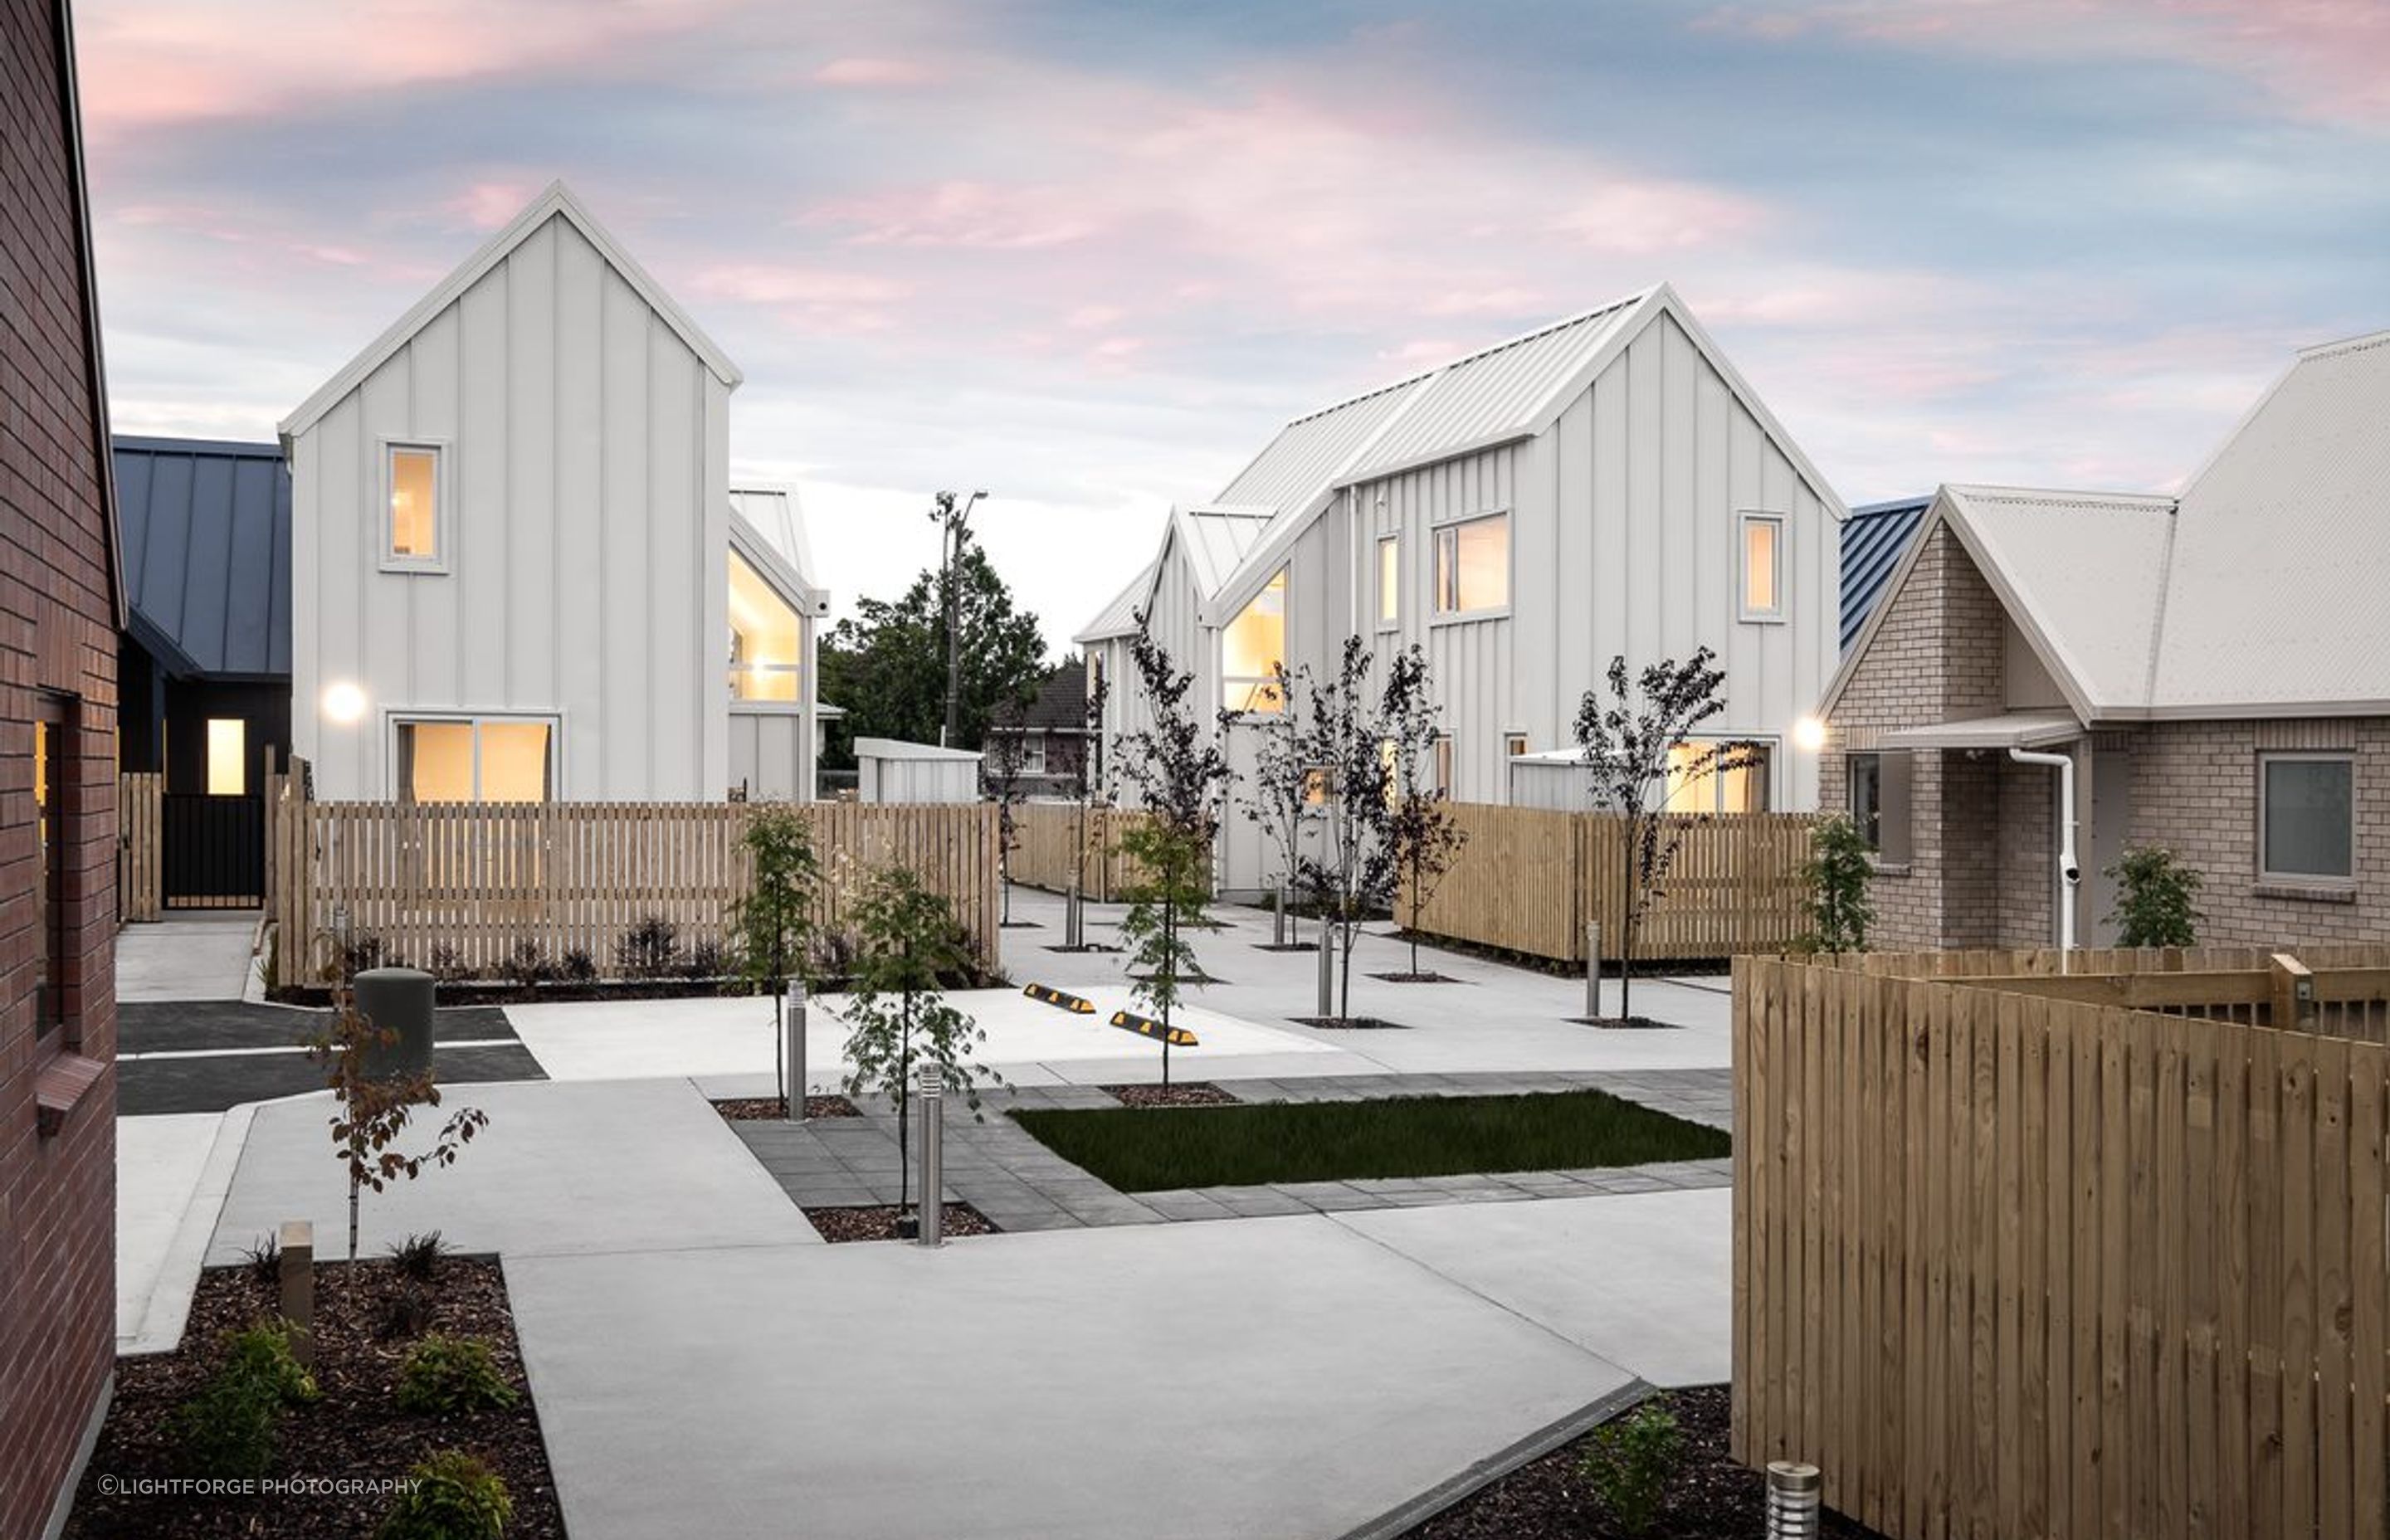 2020 NZ Grand Prix Winner: The Rangiora Social Housing project redeveloped an existing site with nine 1950s state houses. From this, they created 28 one-bedroom units – the largest redevelopment undertaken by Housing New Zealand in North Canterbury (who a